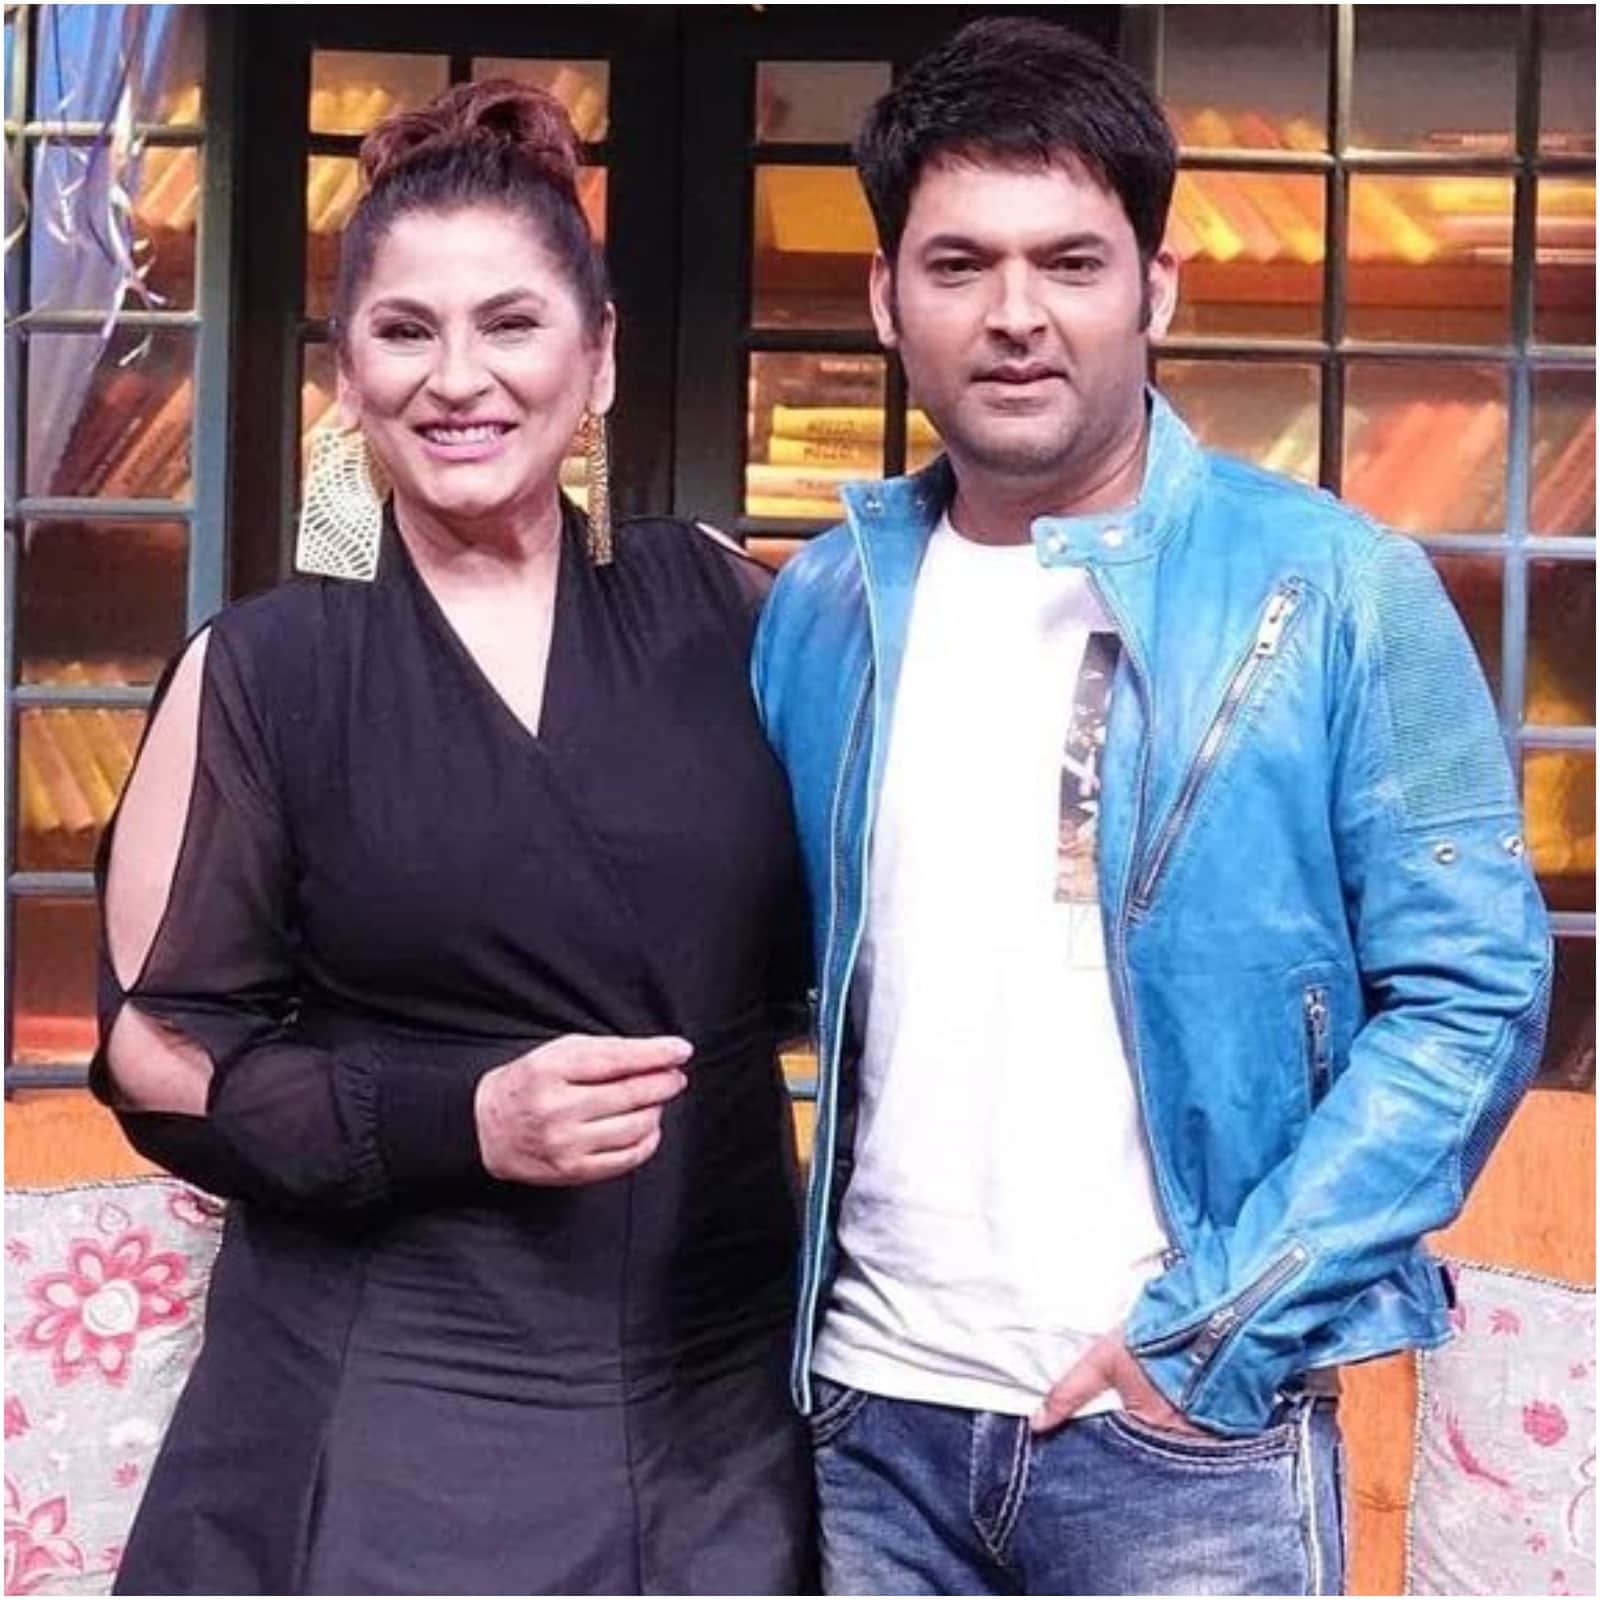 Kapil Sharma Reveals Archana Puran Singh 'Has a Role in Making Me a Star'; Here's How